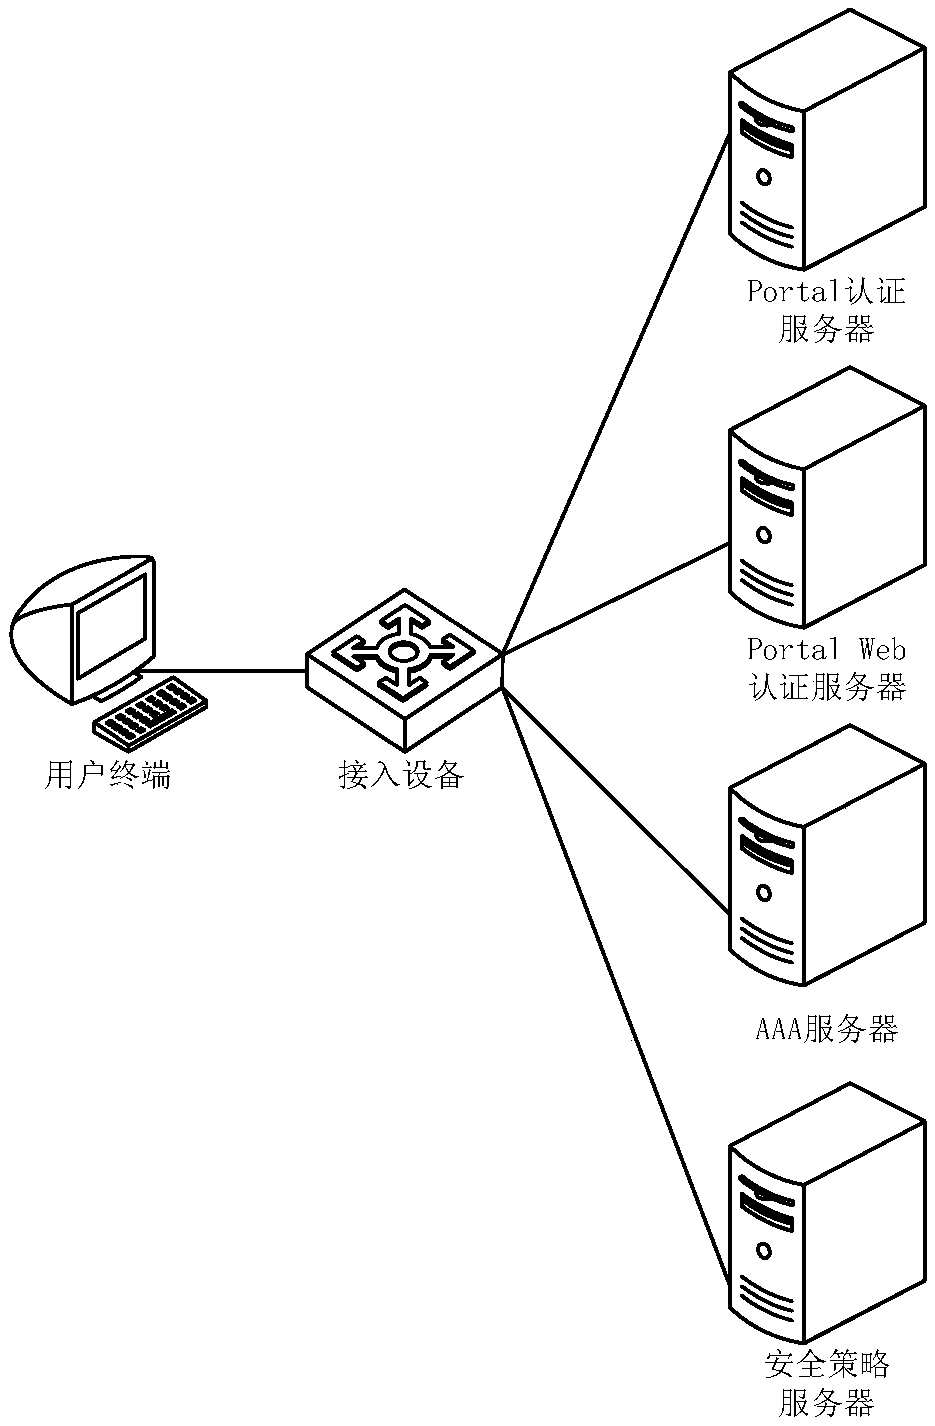 Service message processing method and apparatus